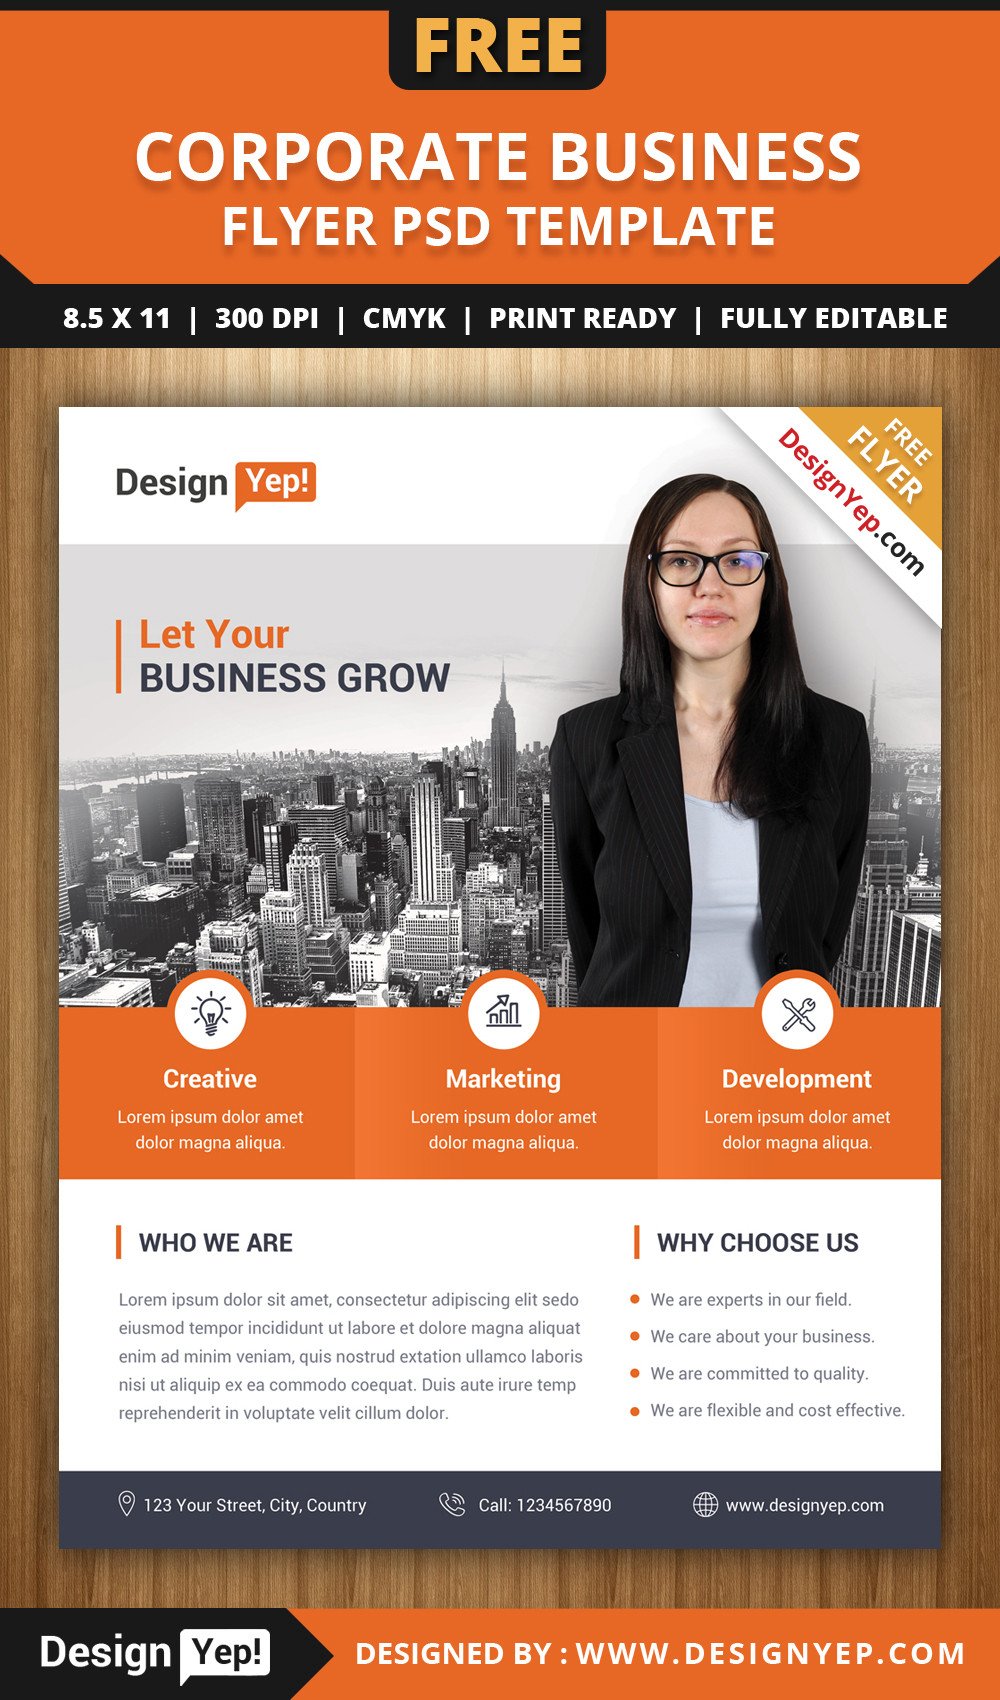 Free Psd Business Flyer Templates Free Corporate Business Flyer Psd Template Designyep